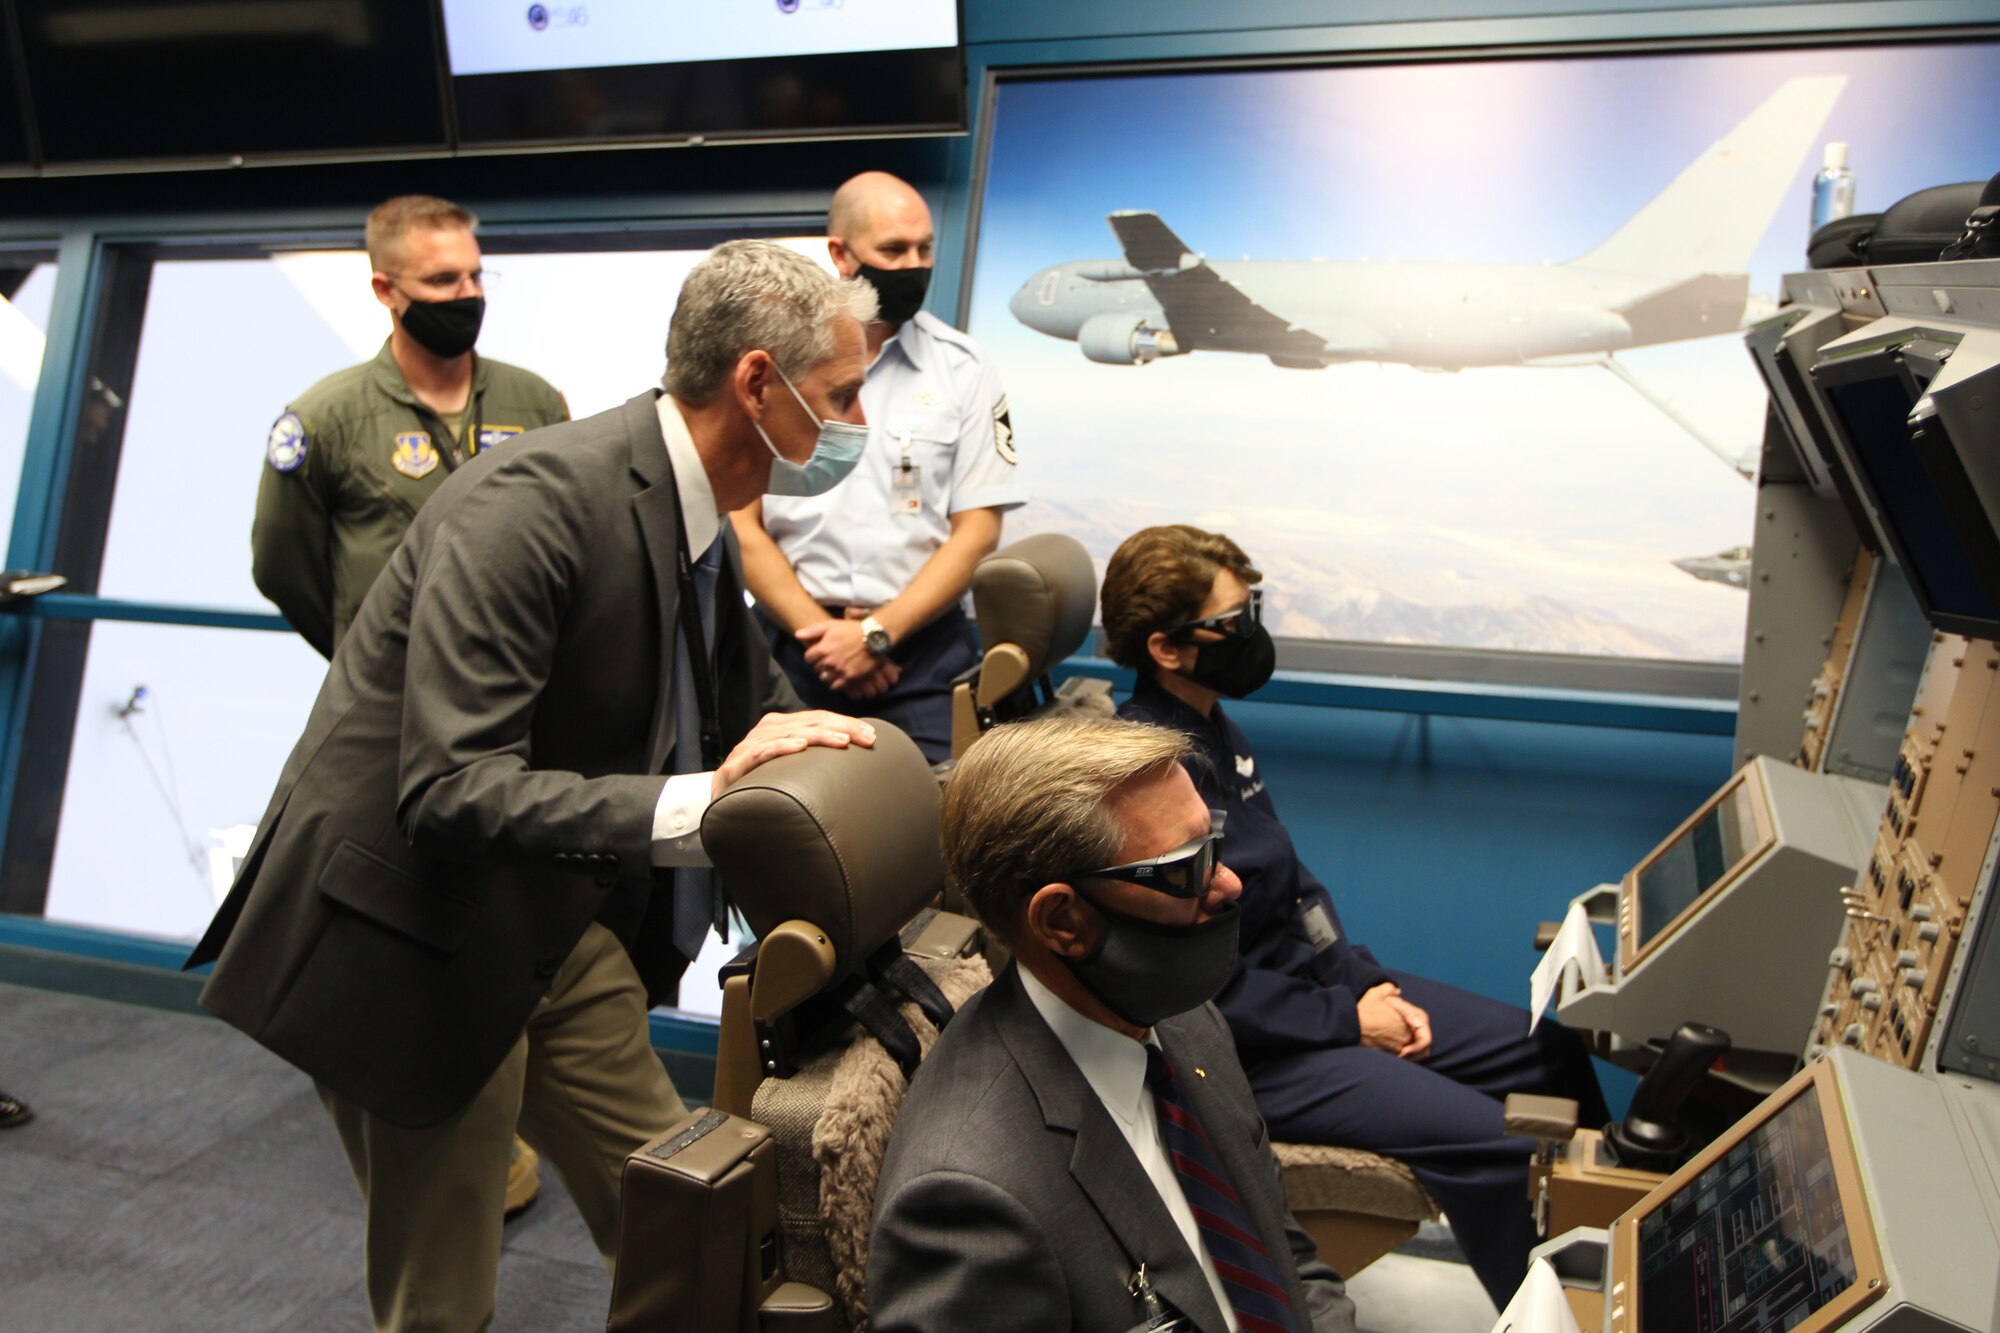 Air Force Gen. Jacqueline Van Ovost, Air Mobility Command commander, back right, and Robert Behler, DOD Director of Operational Test and Evaluation, front right, get a demonstration of the enhanced remote vision system from Ernest Burns, Boeing KC-46 chief boom operator, front left, at Boeing Field, Tukwila, Washington, Sept. 4, 2020.